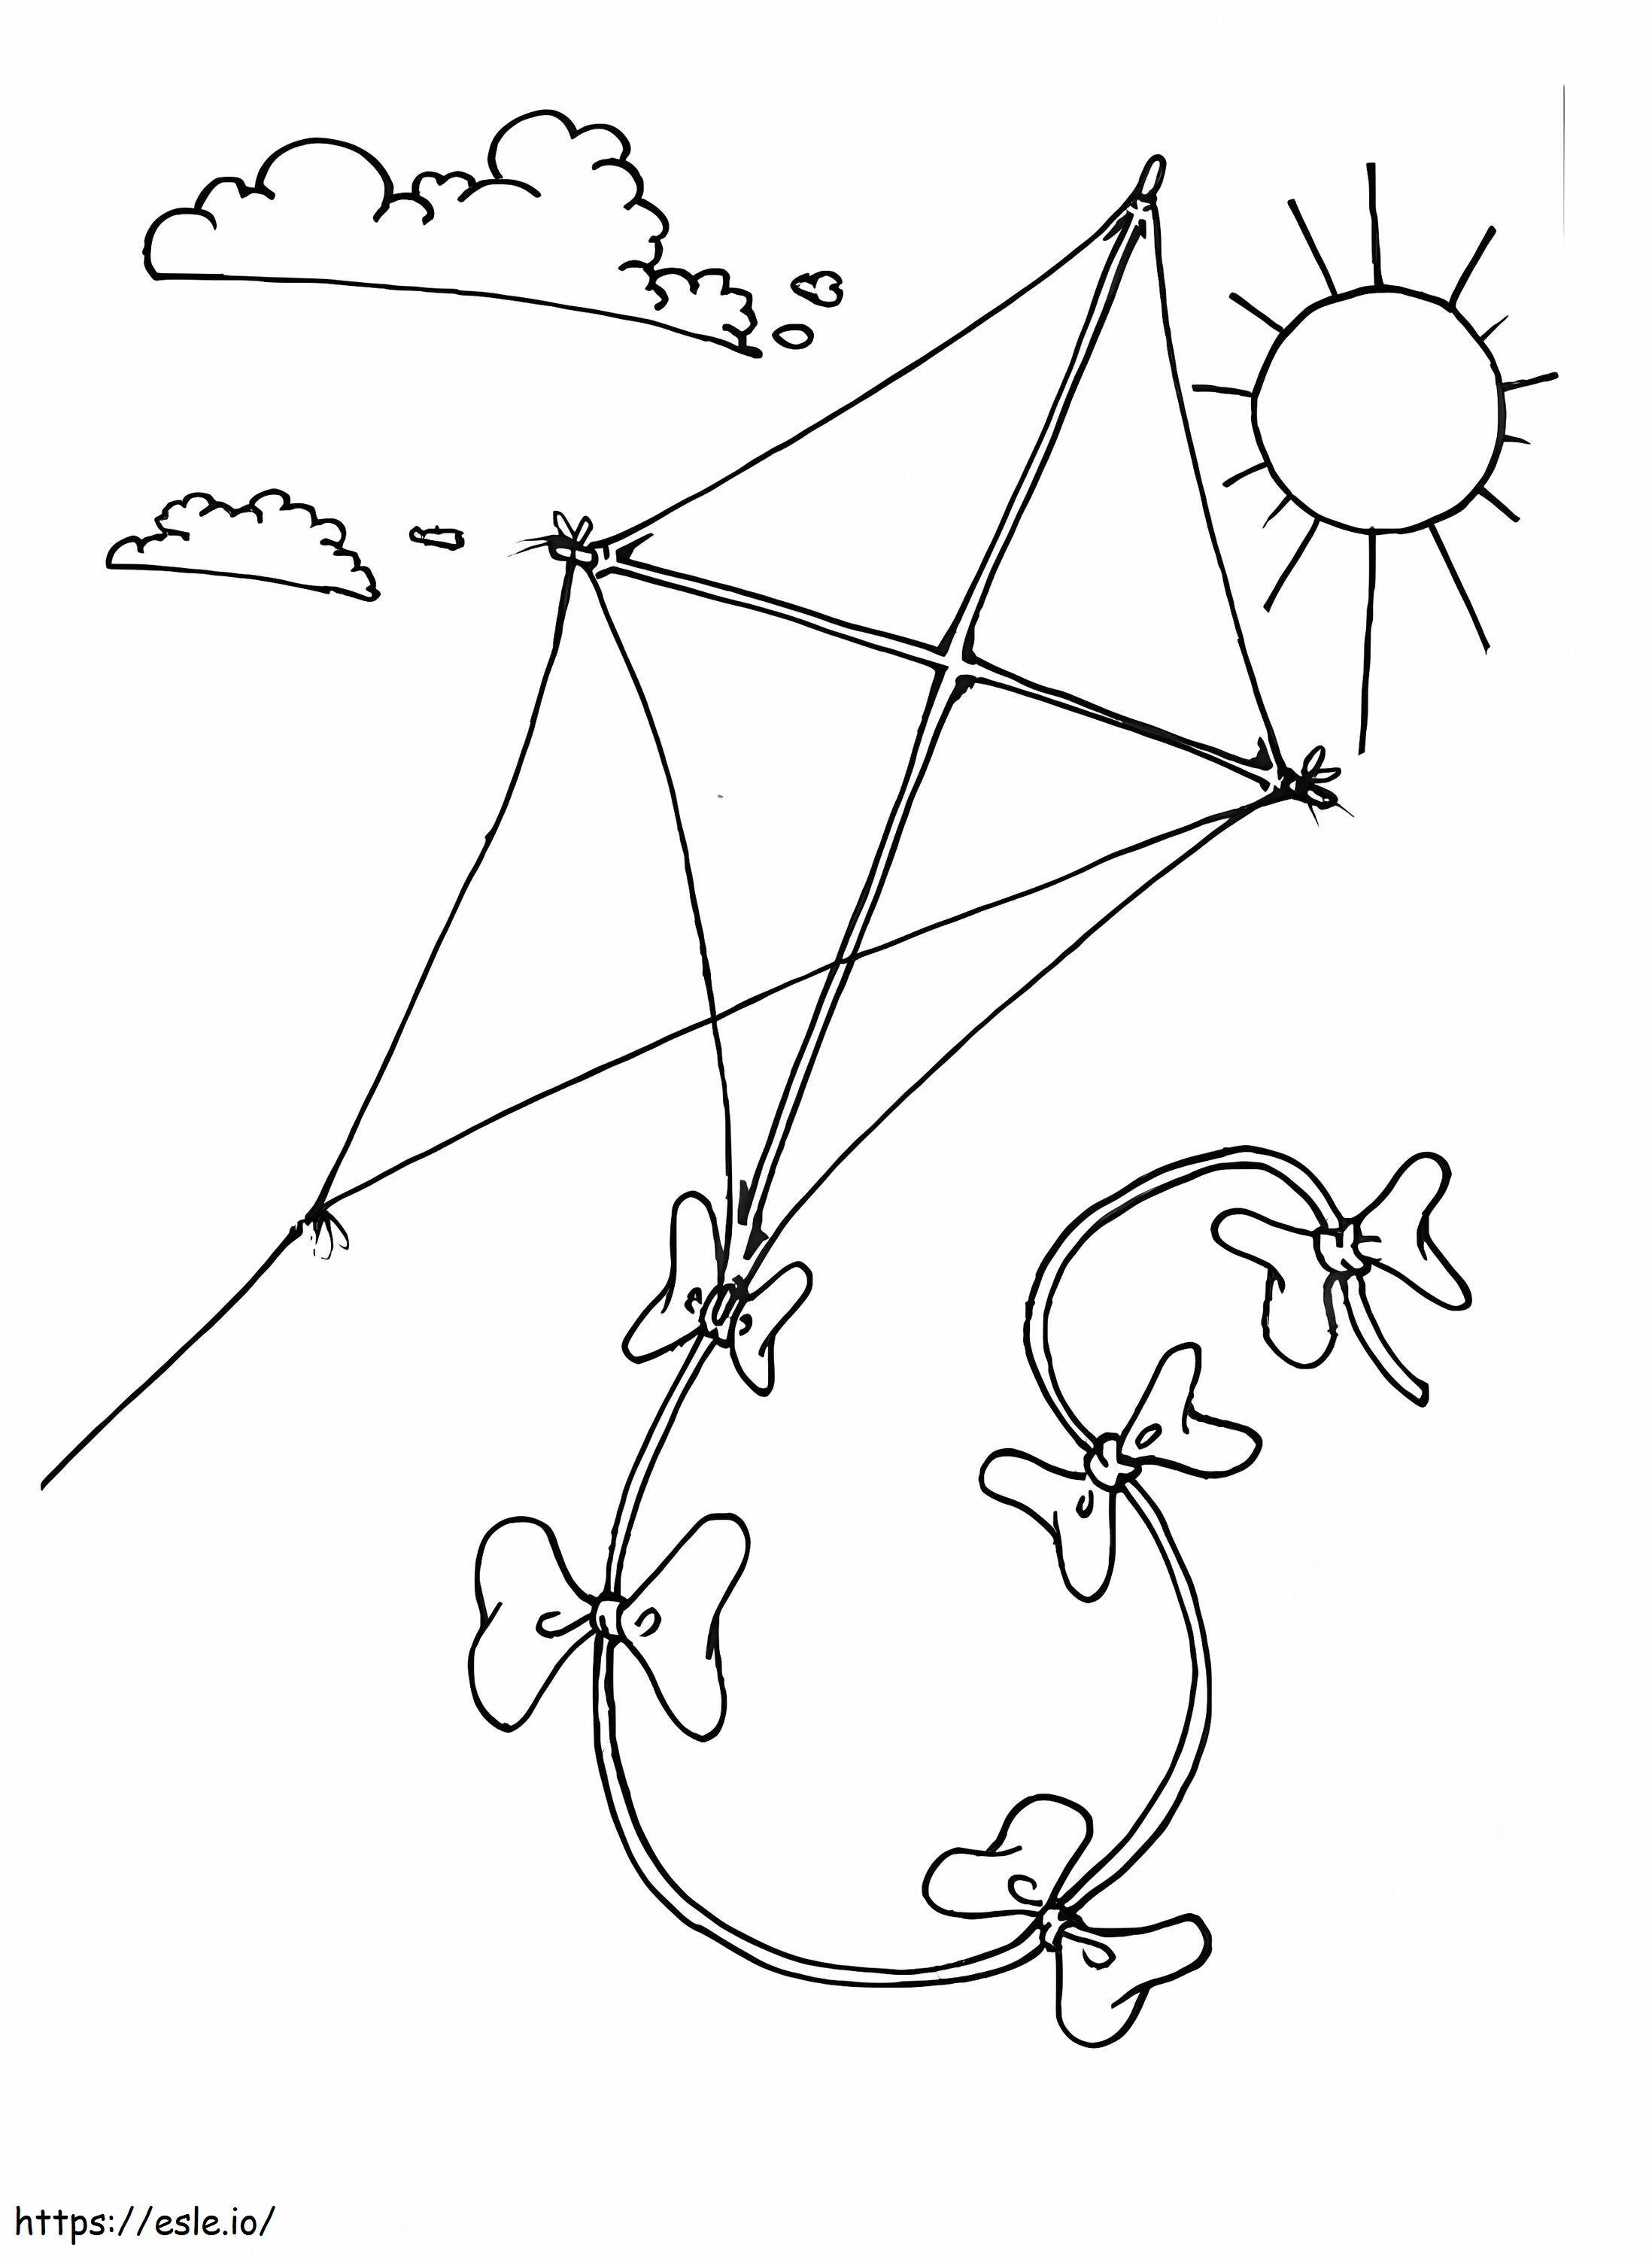 Kite And Sun coloring page